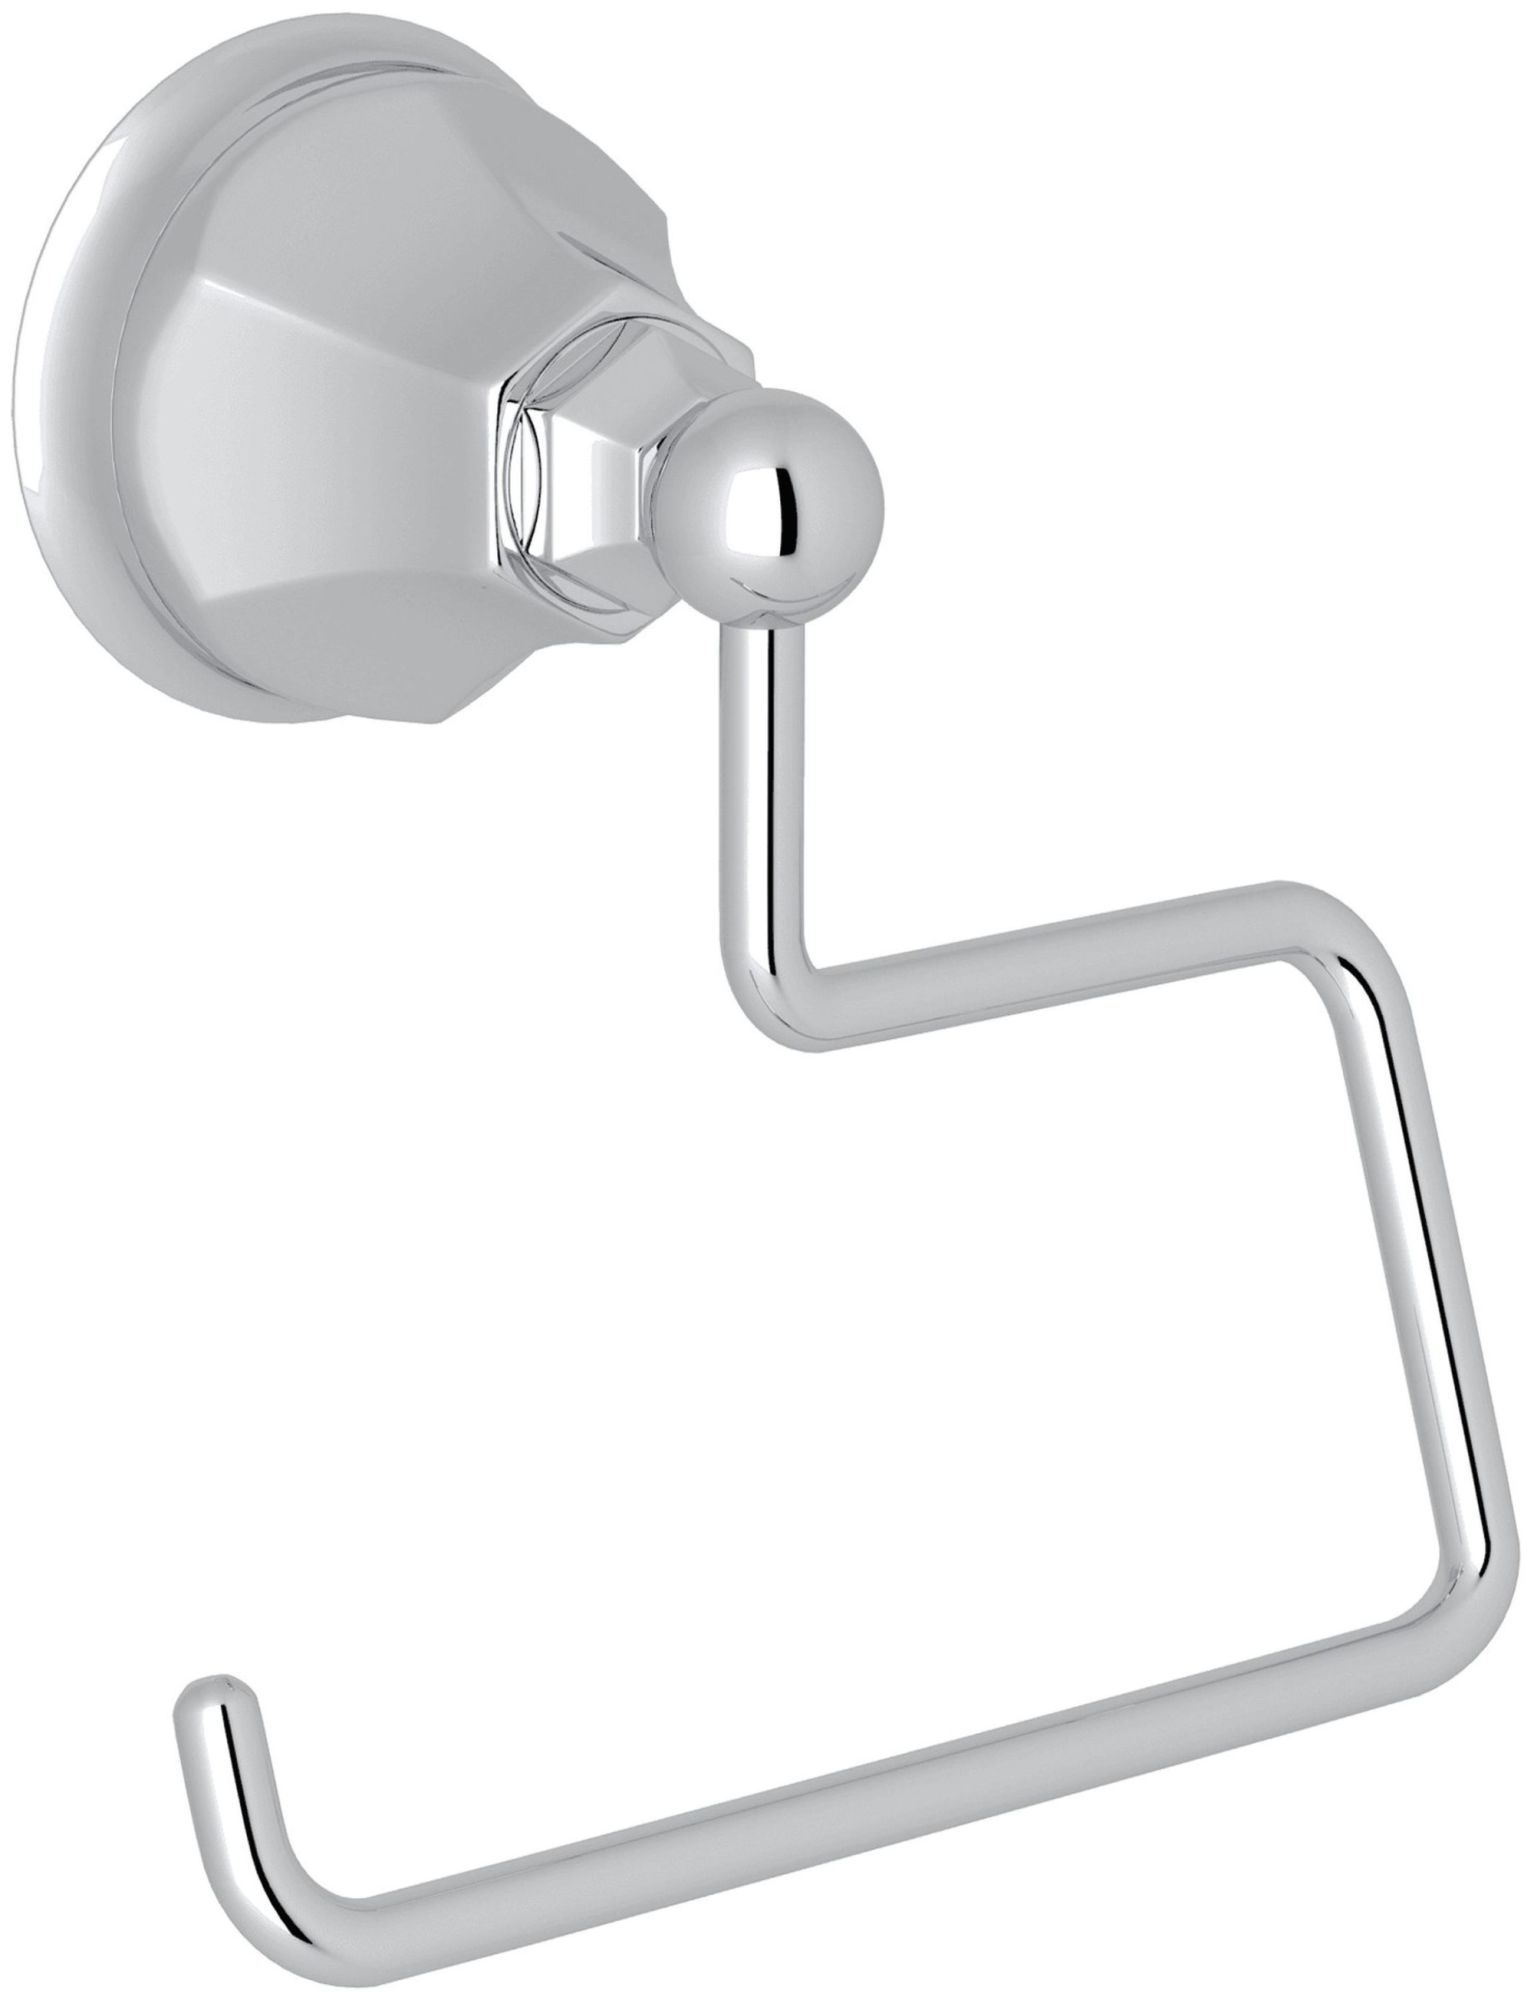 Rohl A6892 Palladian Wall Mounted Euro Toilet Paper Holder - Chrome - image 1 of 6